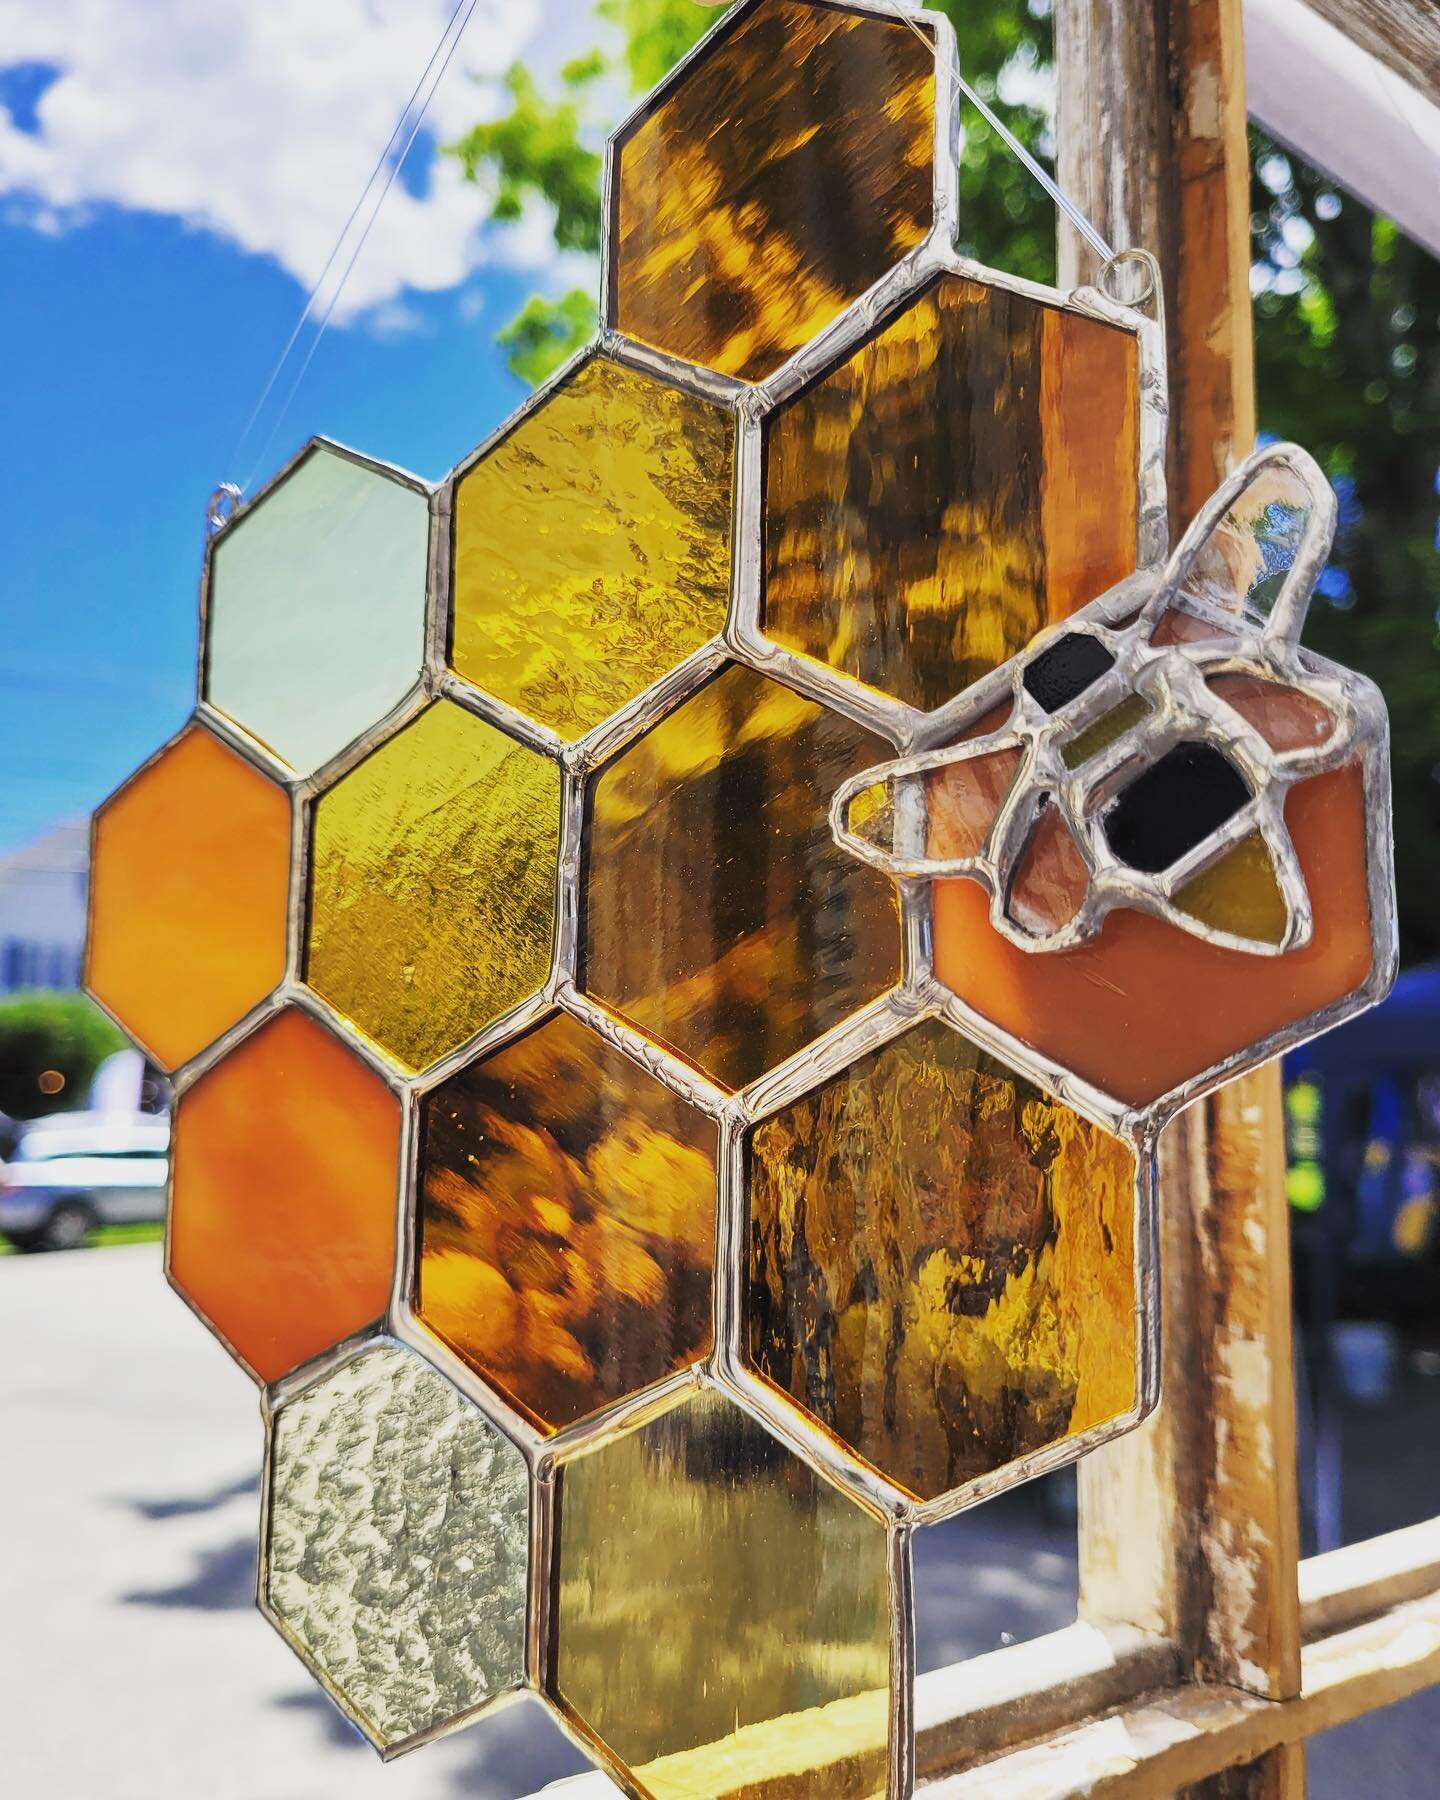 Sweet reflections. 

#honeycomb #savethebees #stainedglass